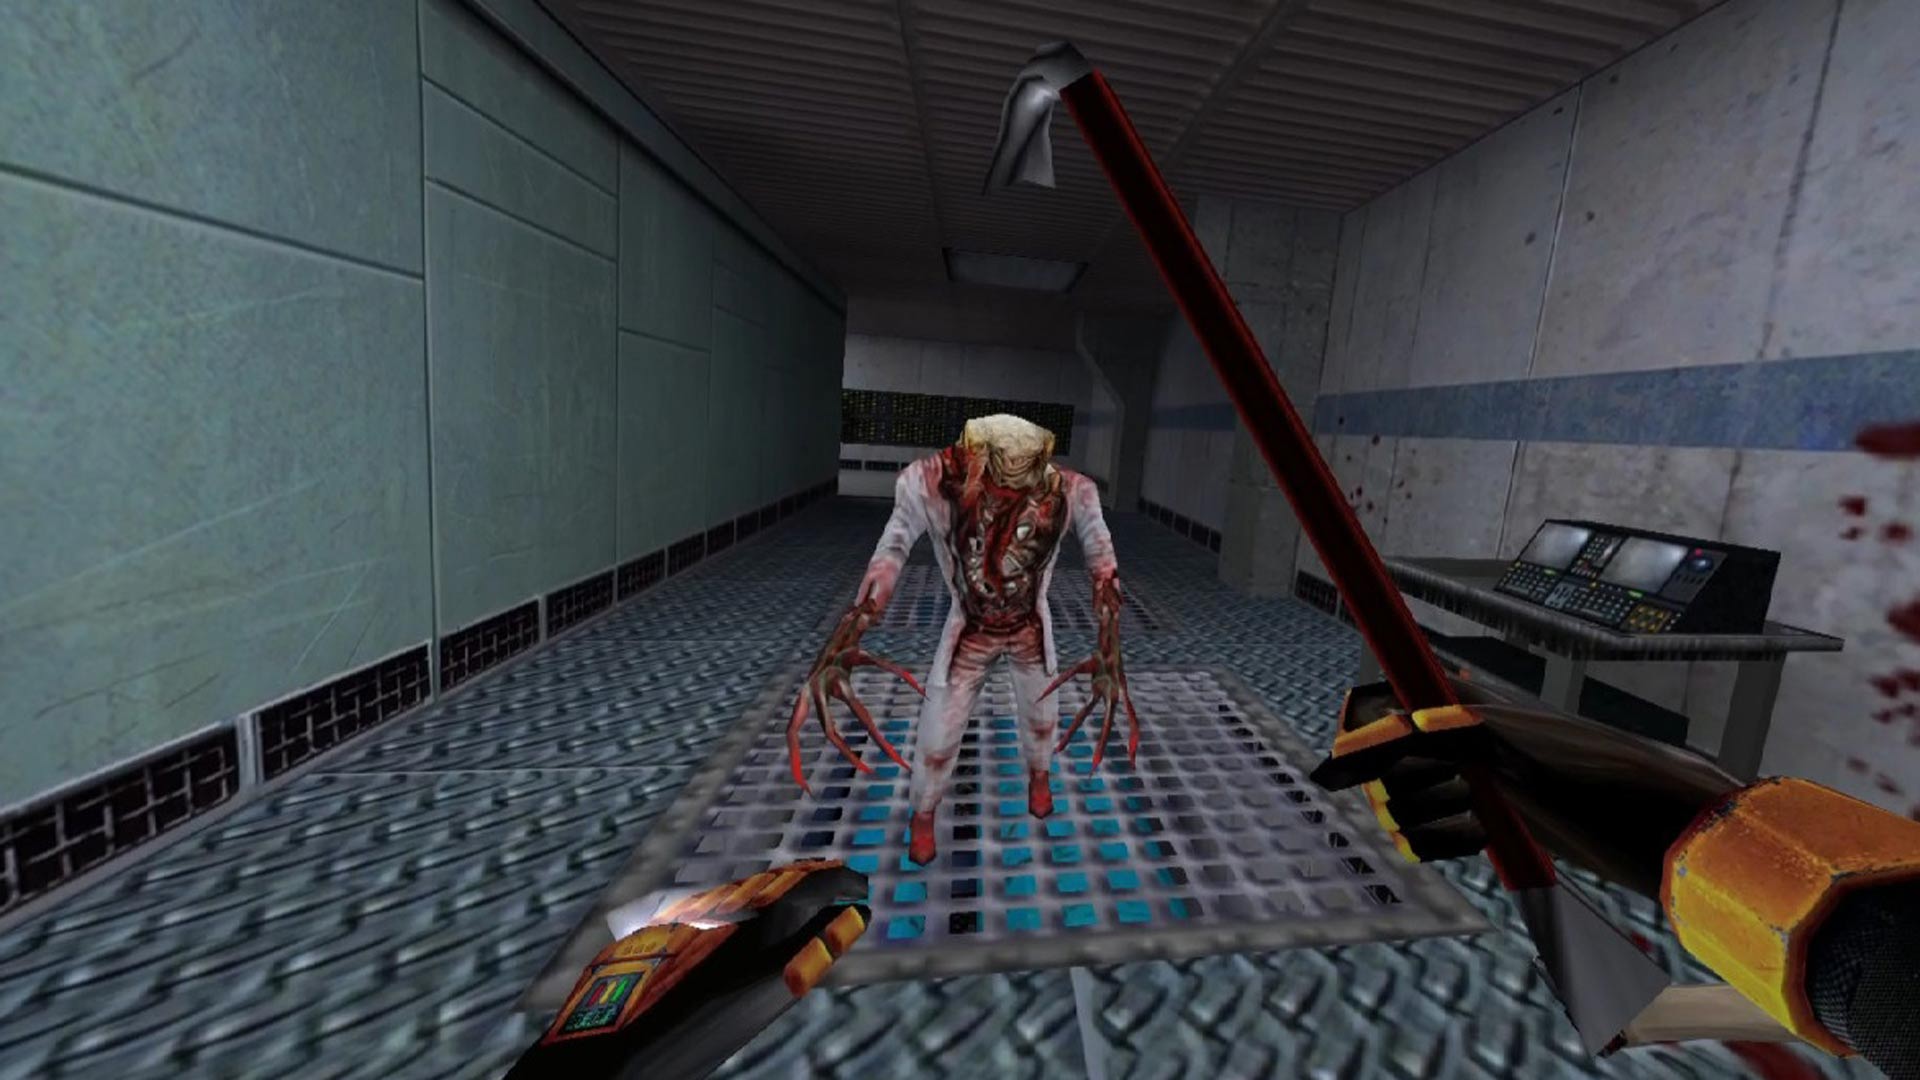 Half-Life 2' VR Mod Launches Today on Steam, Bringing Free VR Support to  Valve's Classic Adventure